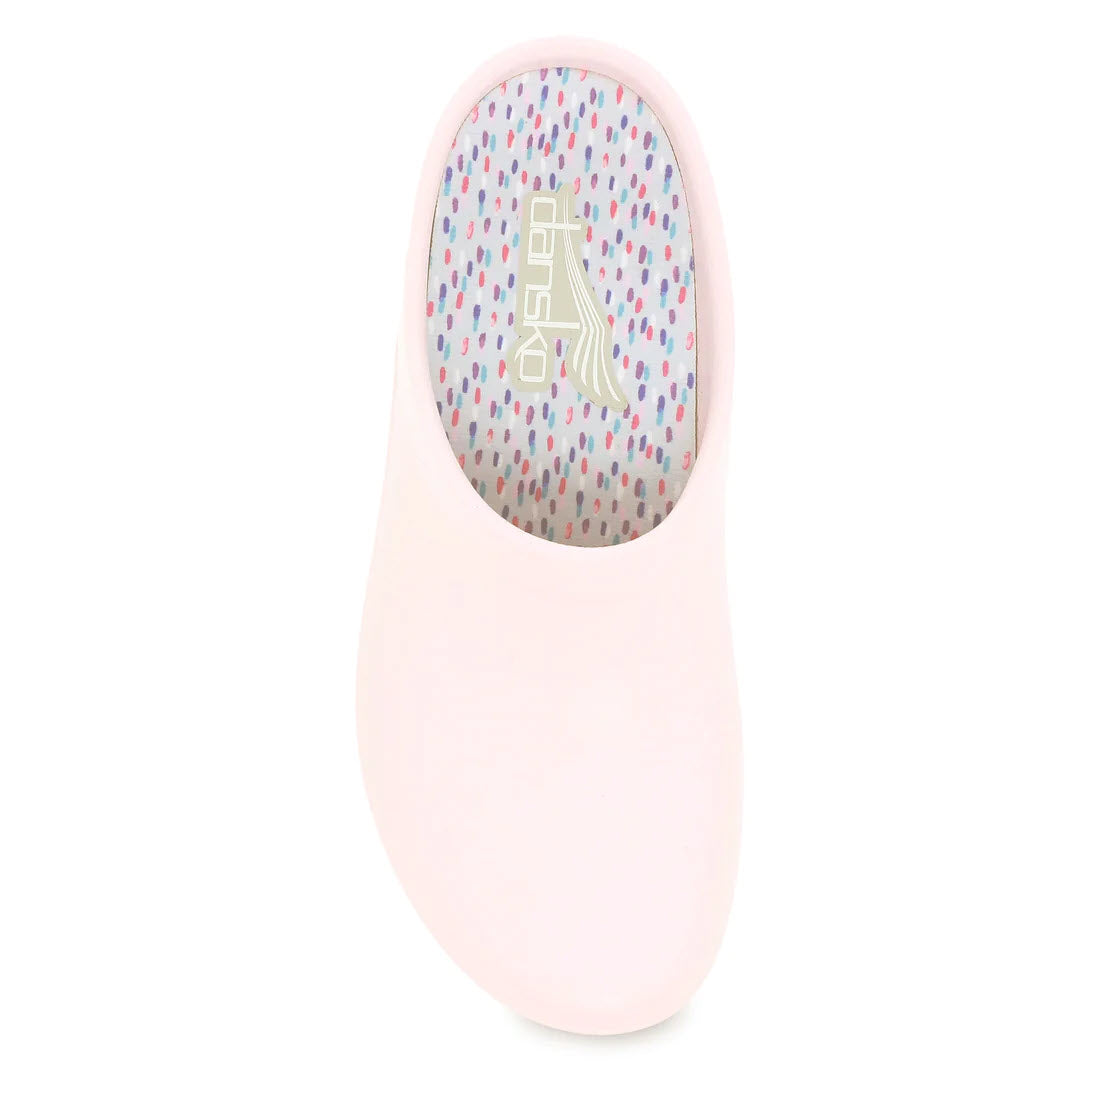 Pale pink ergonomic slipper with a dotted insole design, viewed from the top, featuring a slip-resistant rubber outsole: Dansko Kaci Pink - Womens by Dansko.